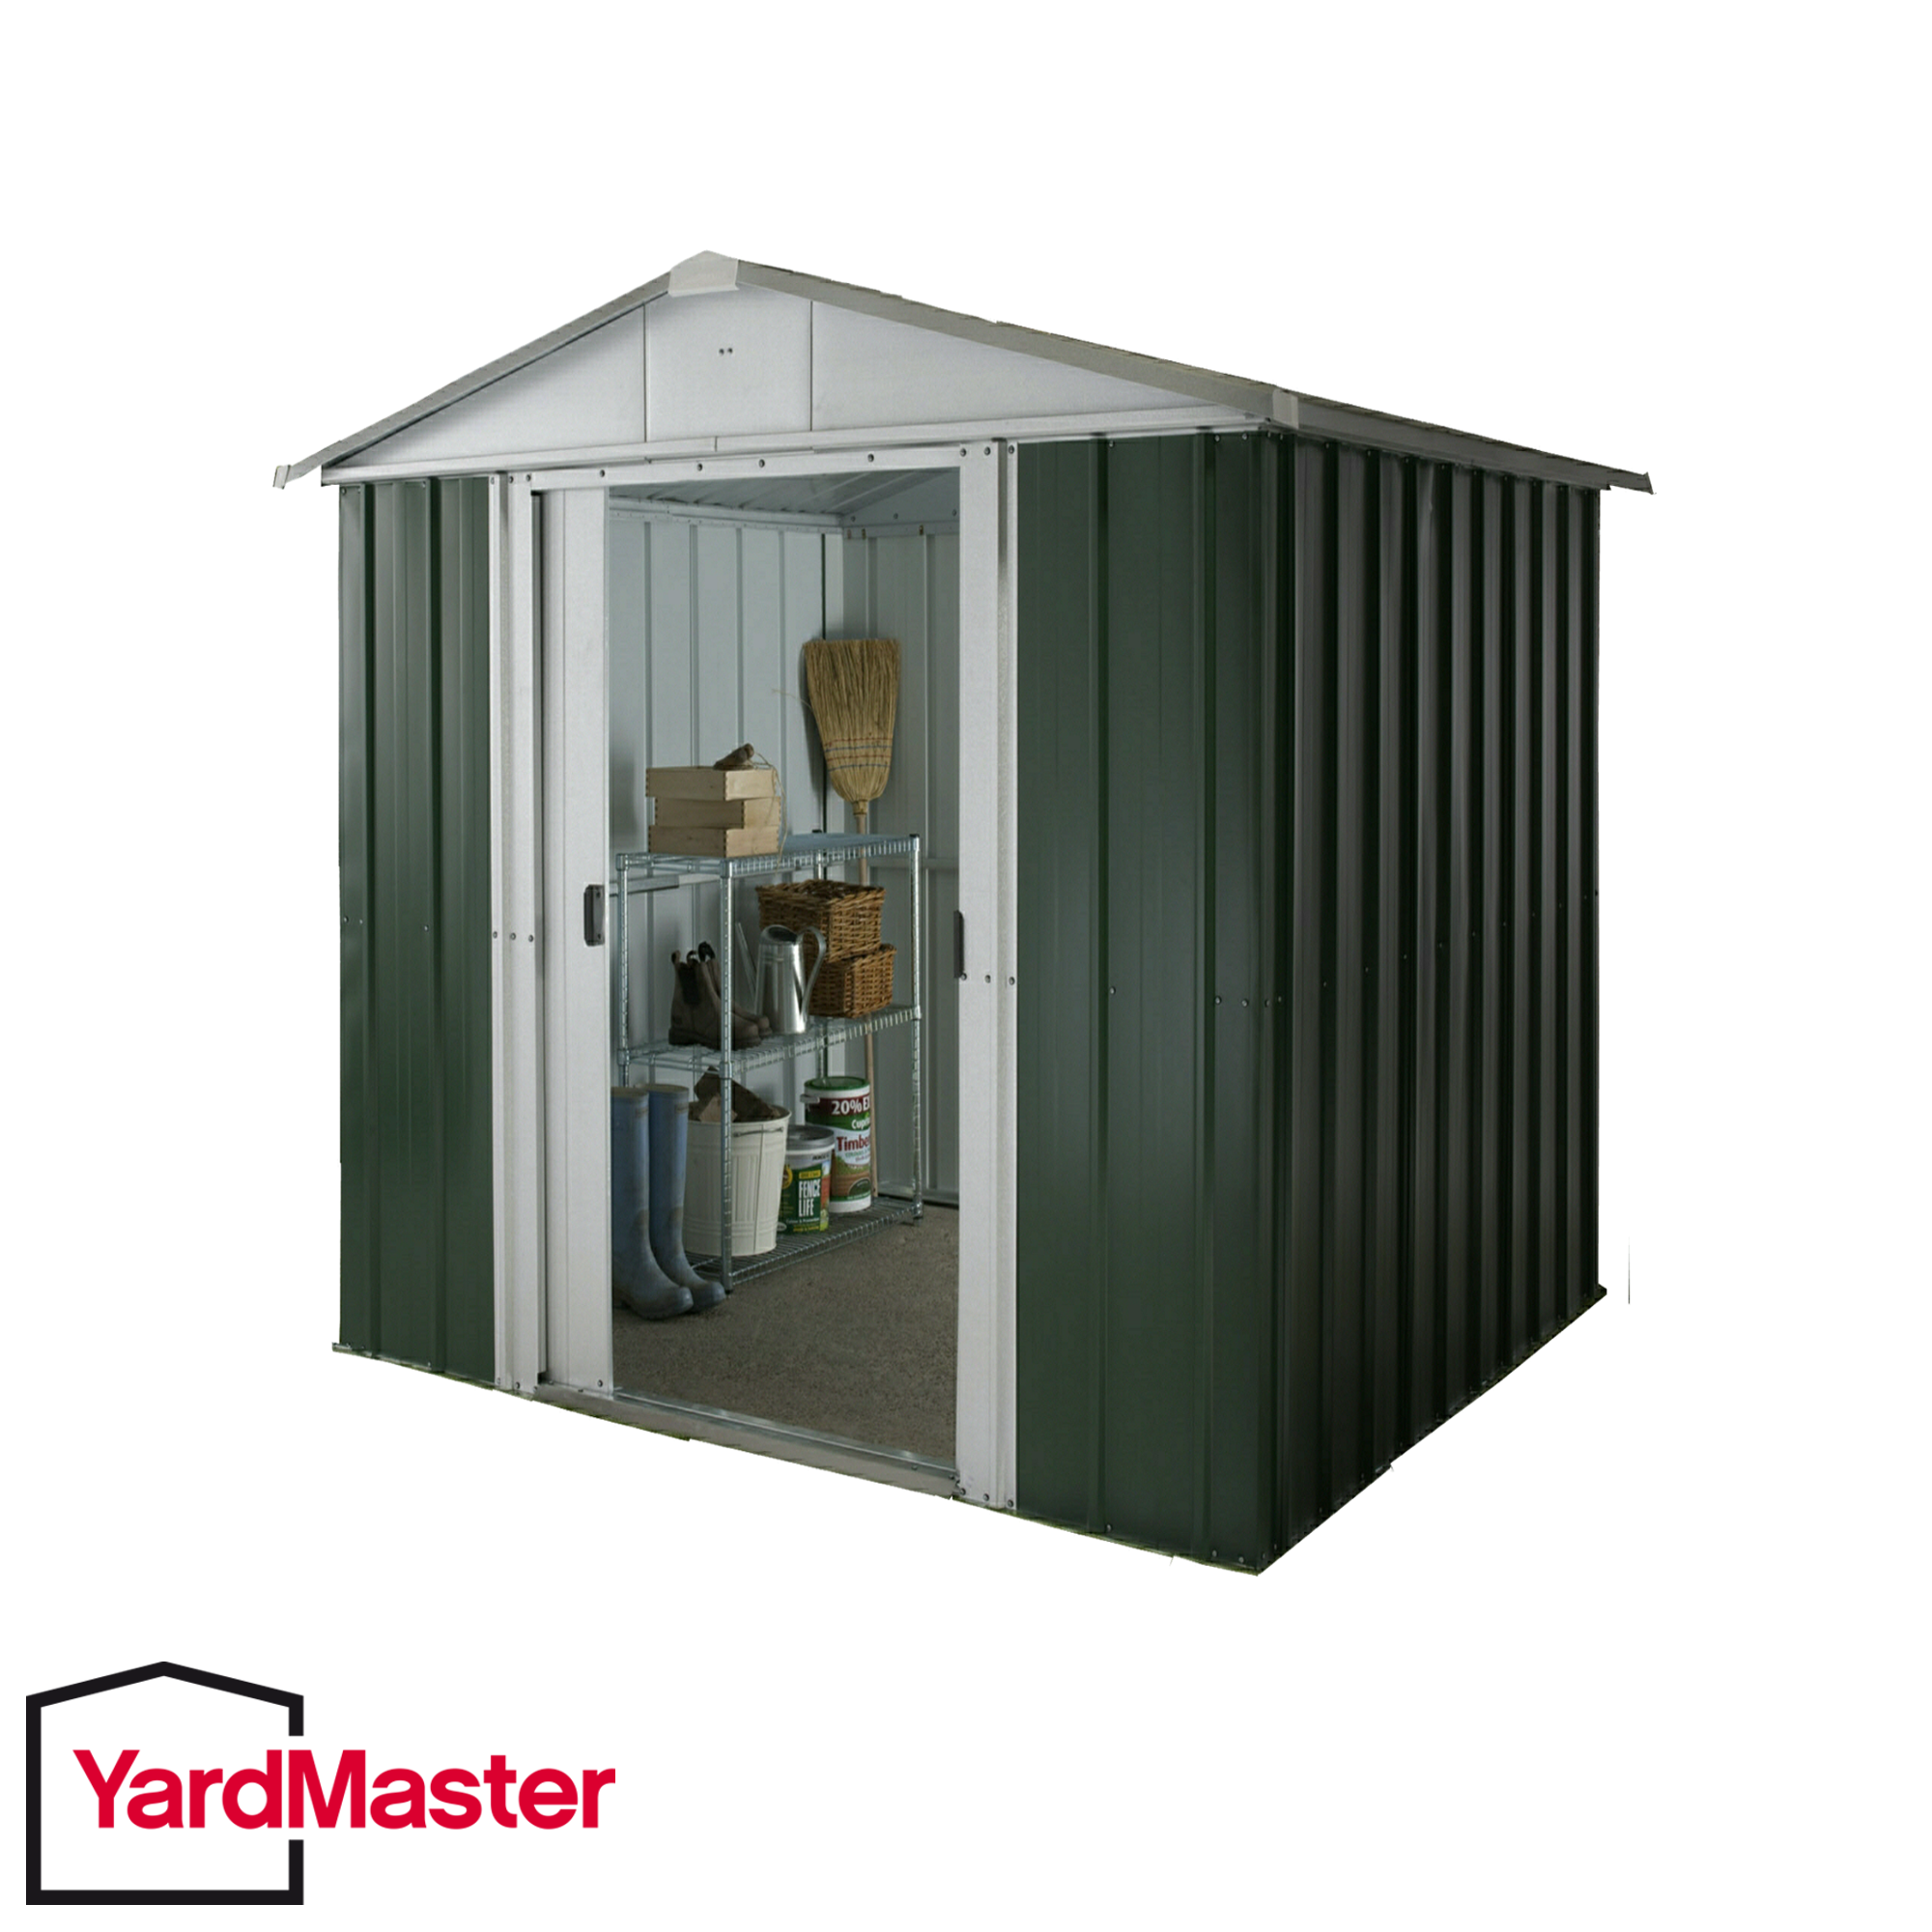 Featured image for “YardMaster 6x6 GEYZ Emerald Deluxe Apex Metal Shed”